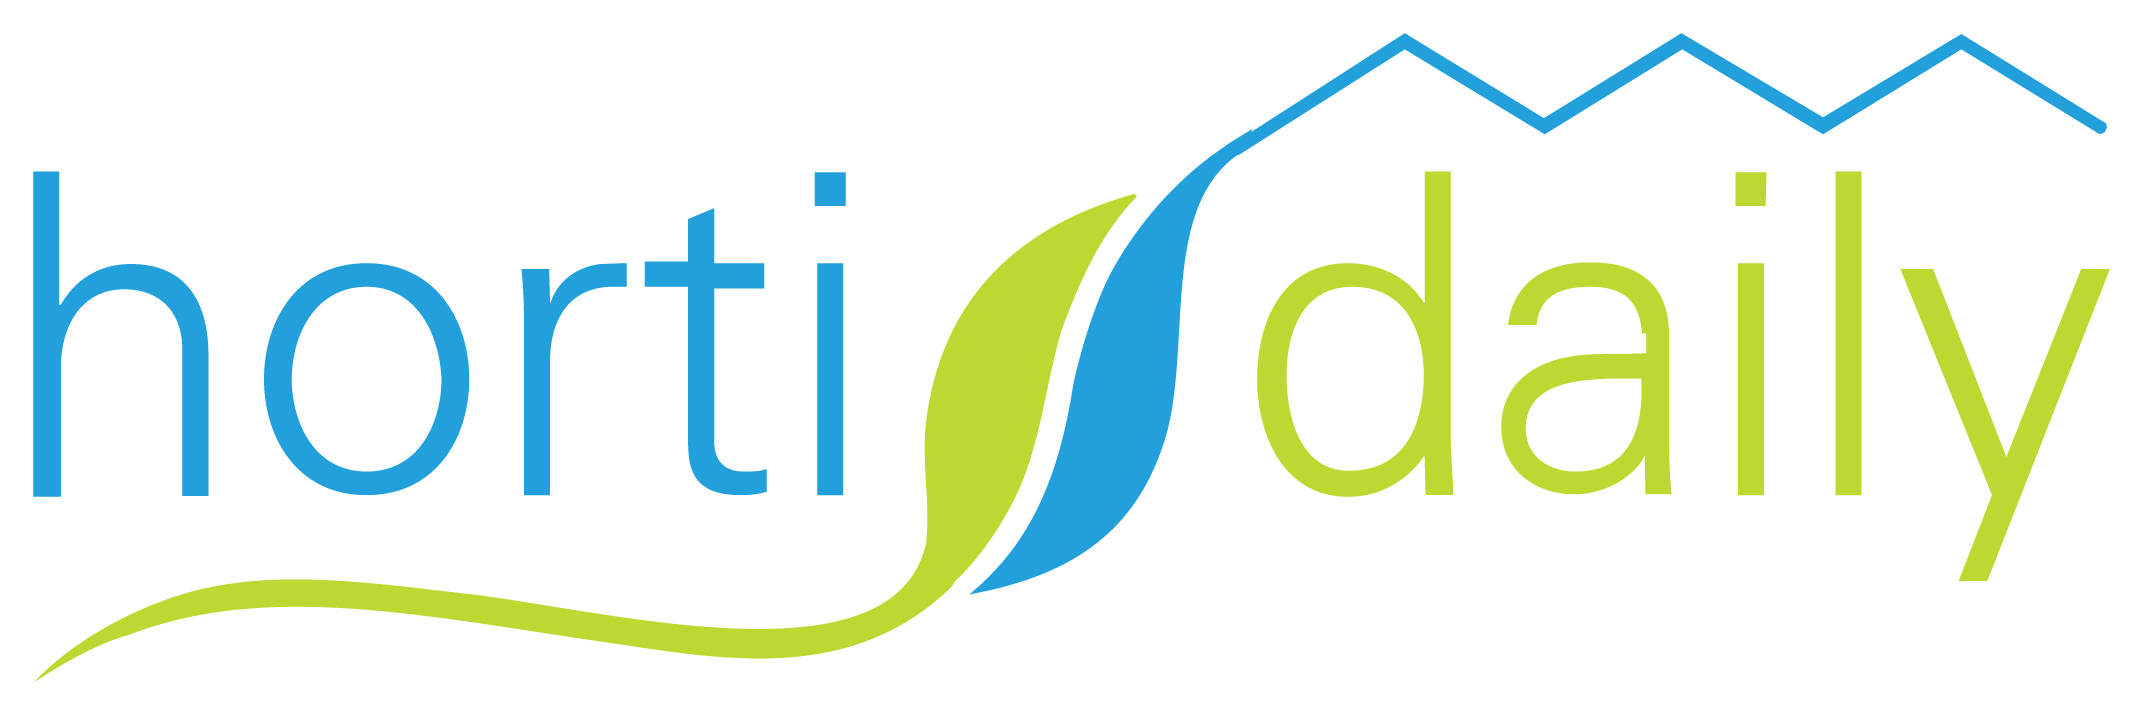 HortiDaily logo in blue and green